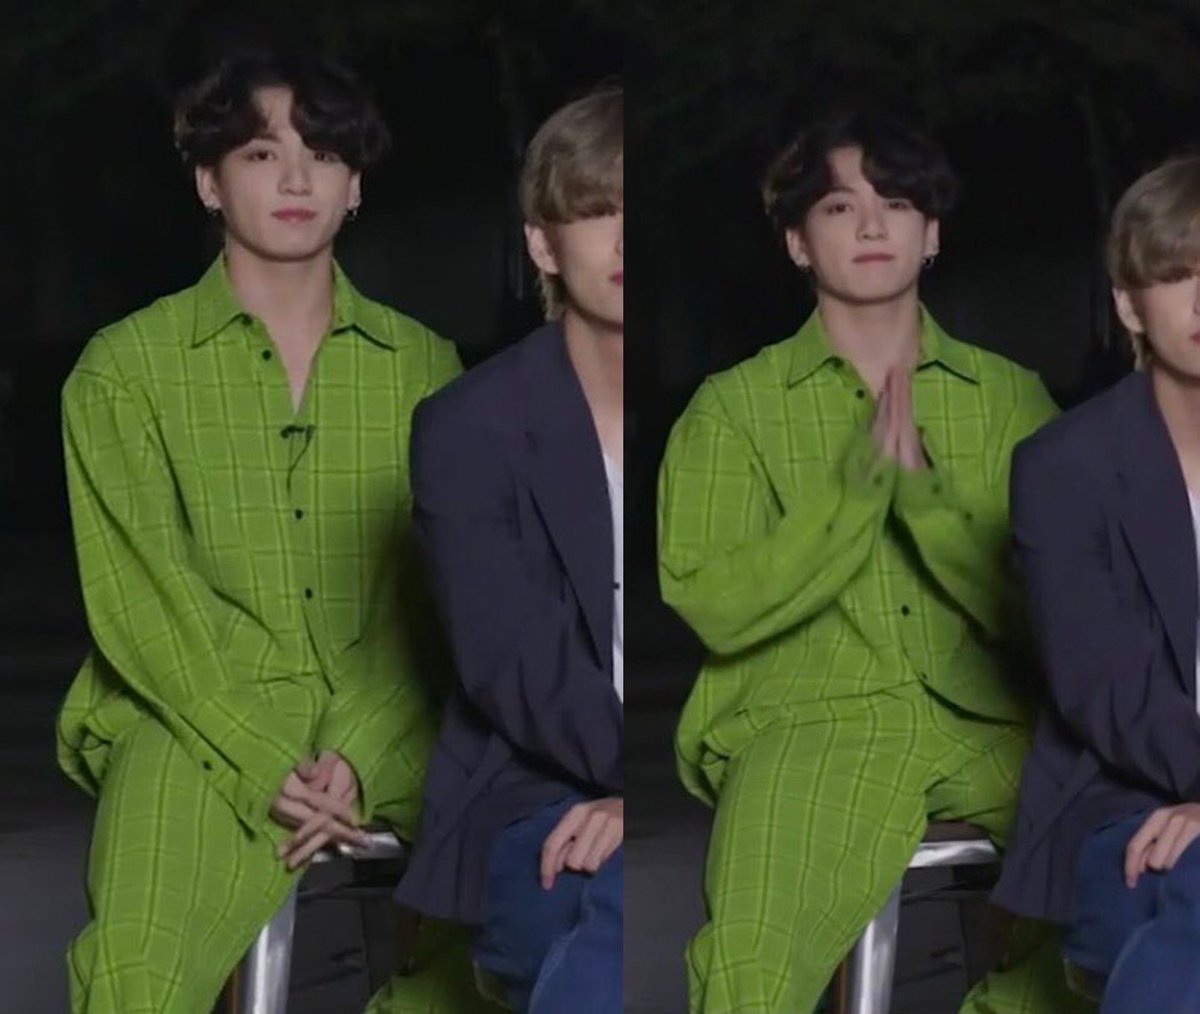 JK also seems to love co-ords/jumpsuits! (like the most recent green one, still on-brand with Virgo = earth/nature tones) Which are the best for when you want that effort but no effort put-together look! (꾸민듯 안 꾸민듯 in korean) credits to  @GetOnSwag for the 2 photos!